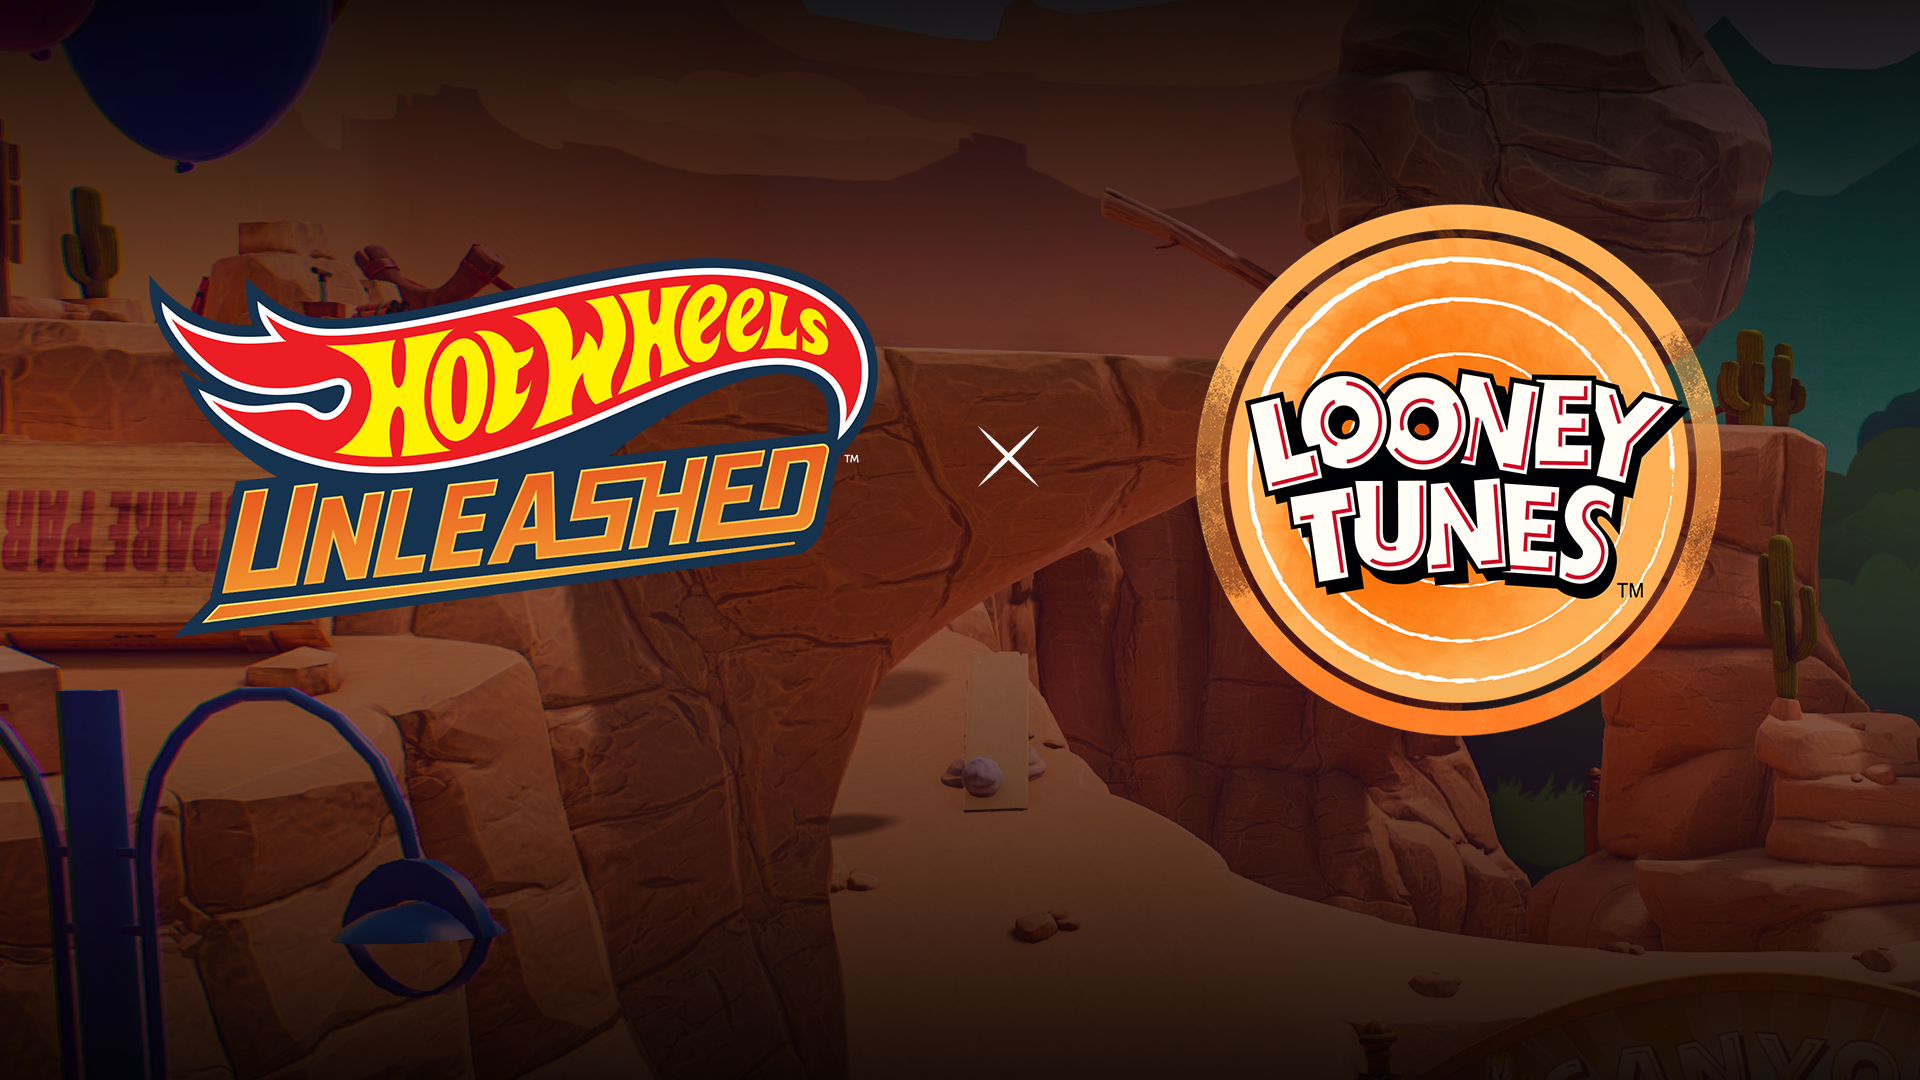 Looney Tunes Expansion For Hot Wheels Unleashed Is Now Available